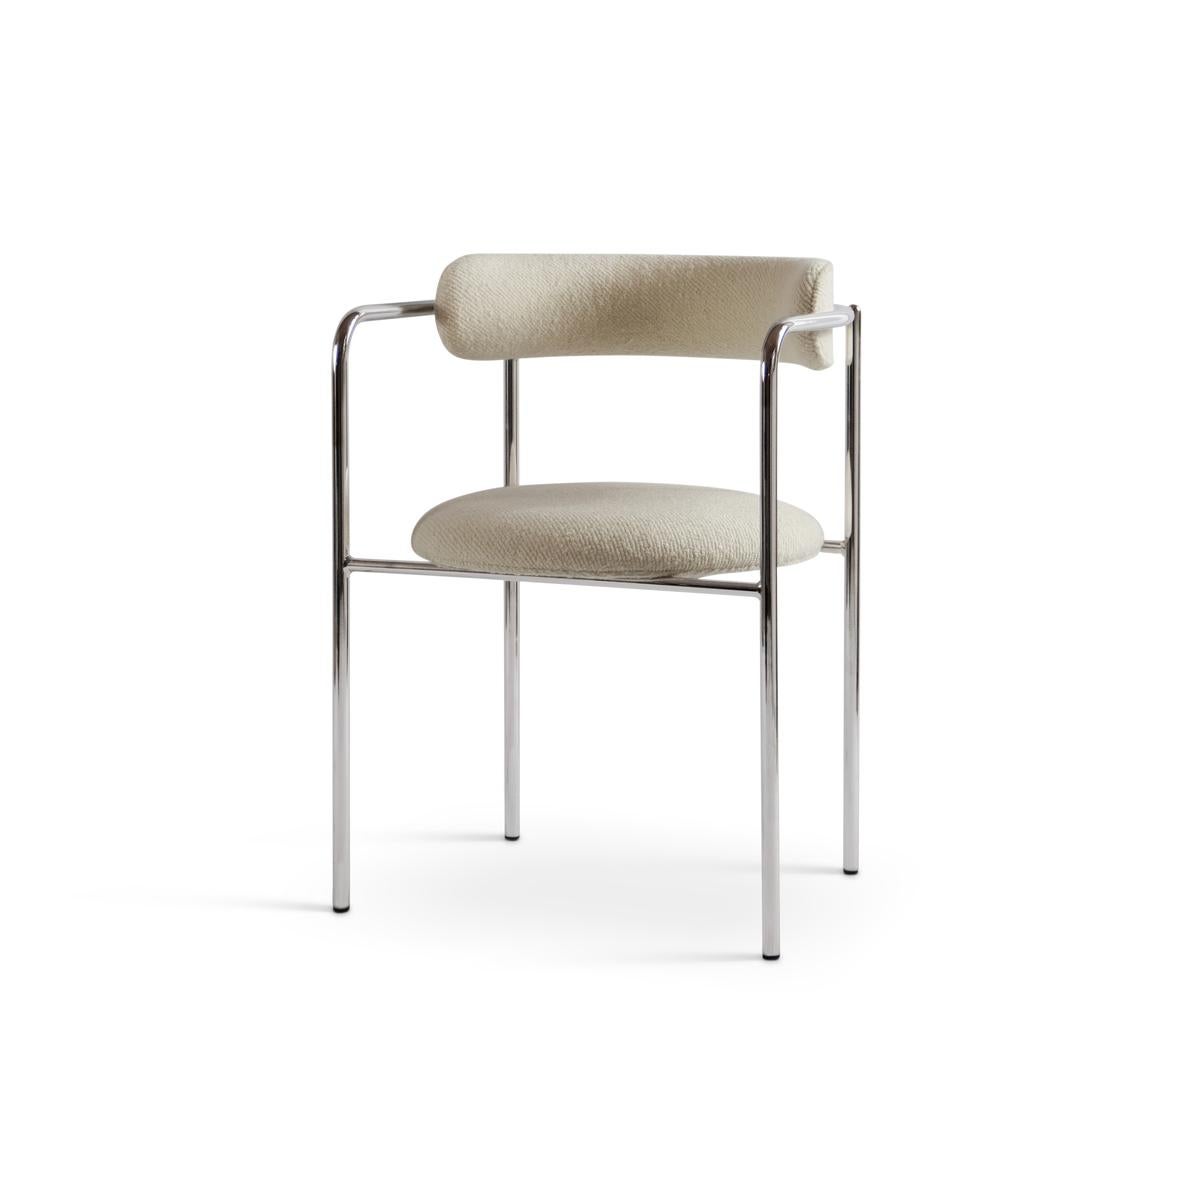 Contemporary Chair 'FF 4-Legs', Vidar Fabric, Black 1880 and White 1880 For Sale 12